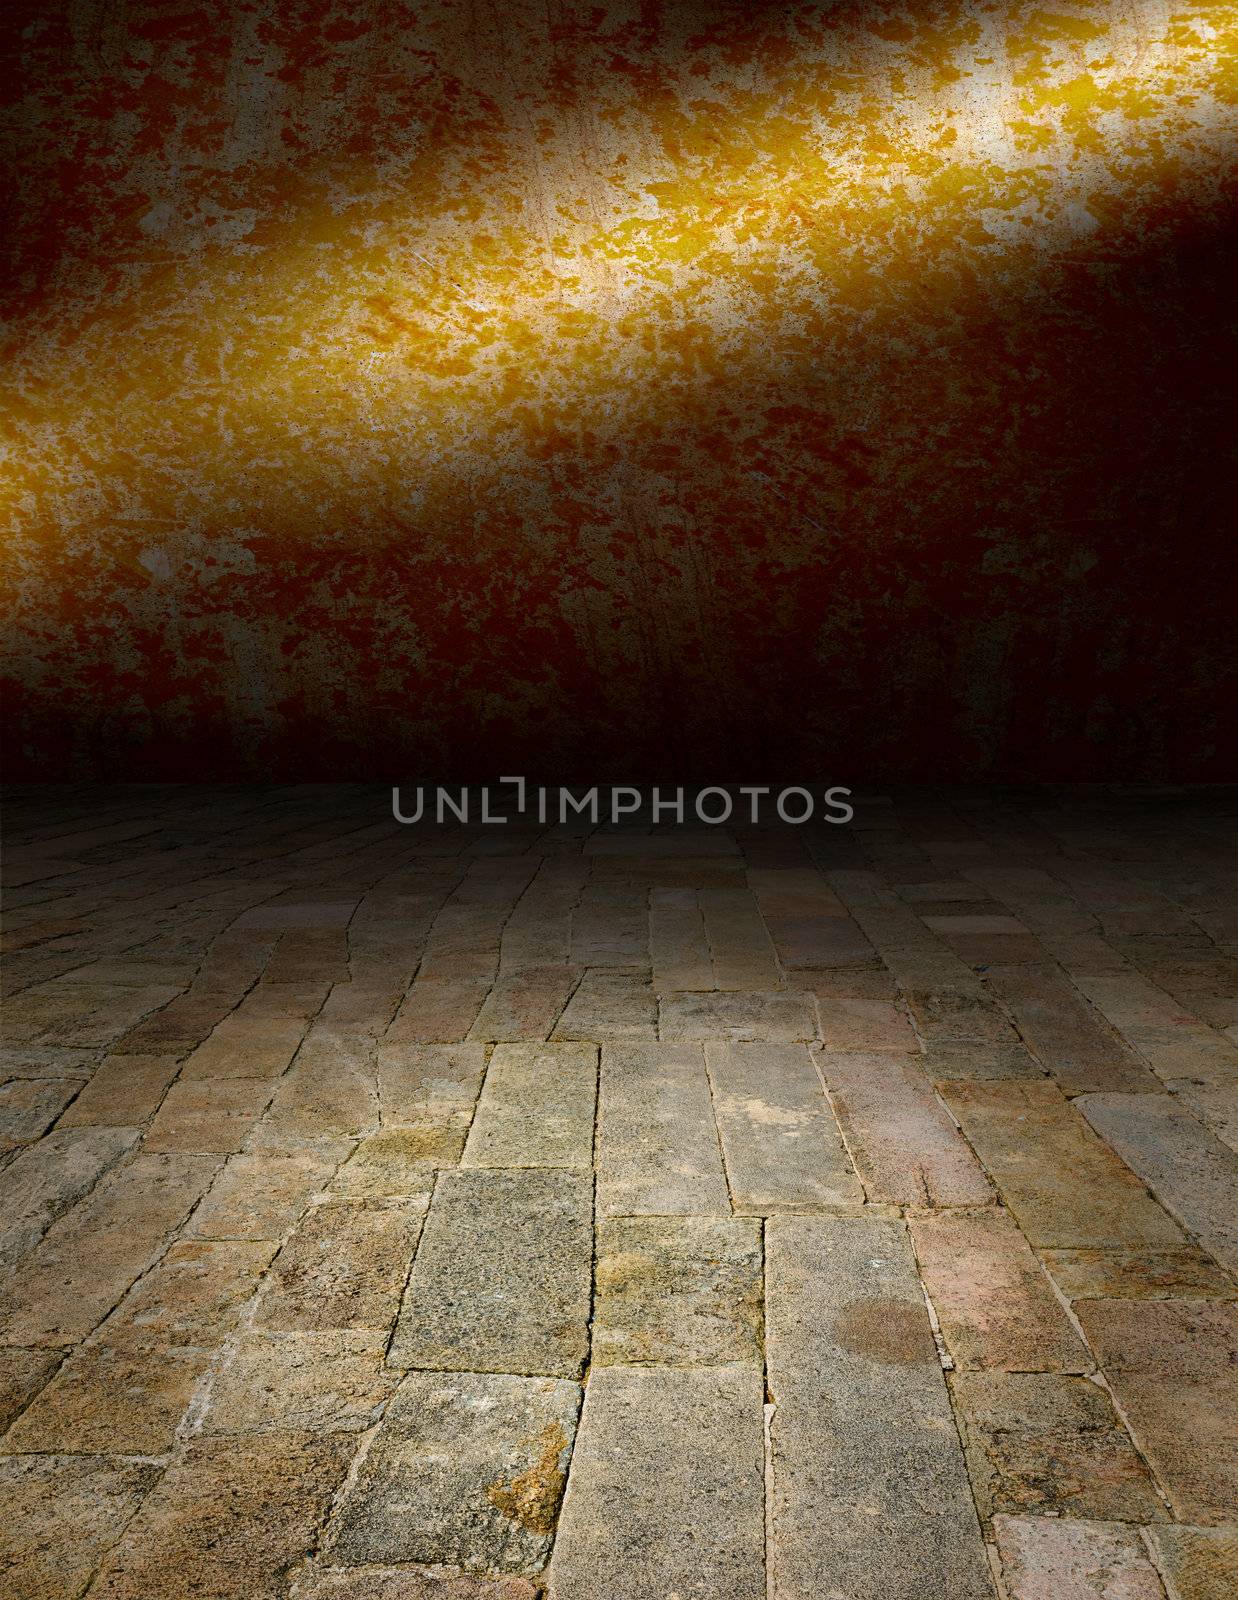 Artistic interiors - a scene with a stone floor